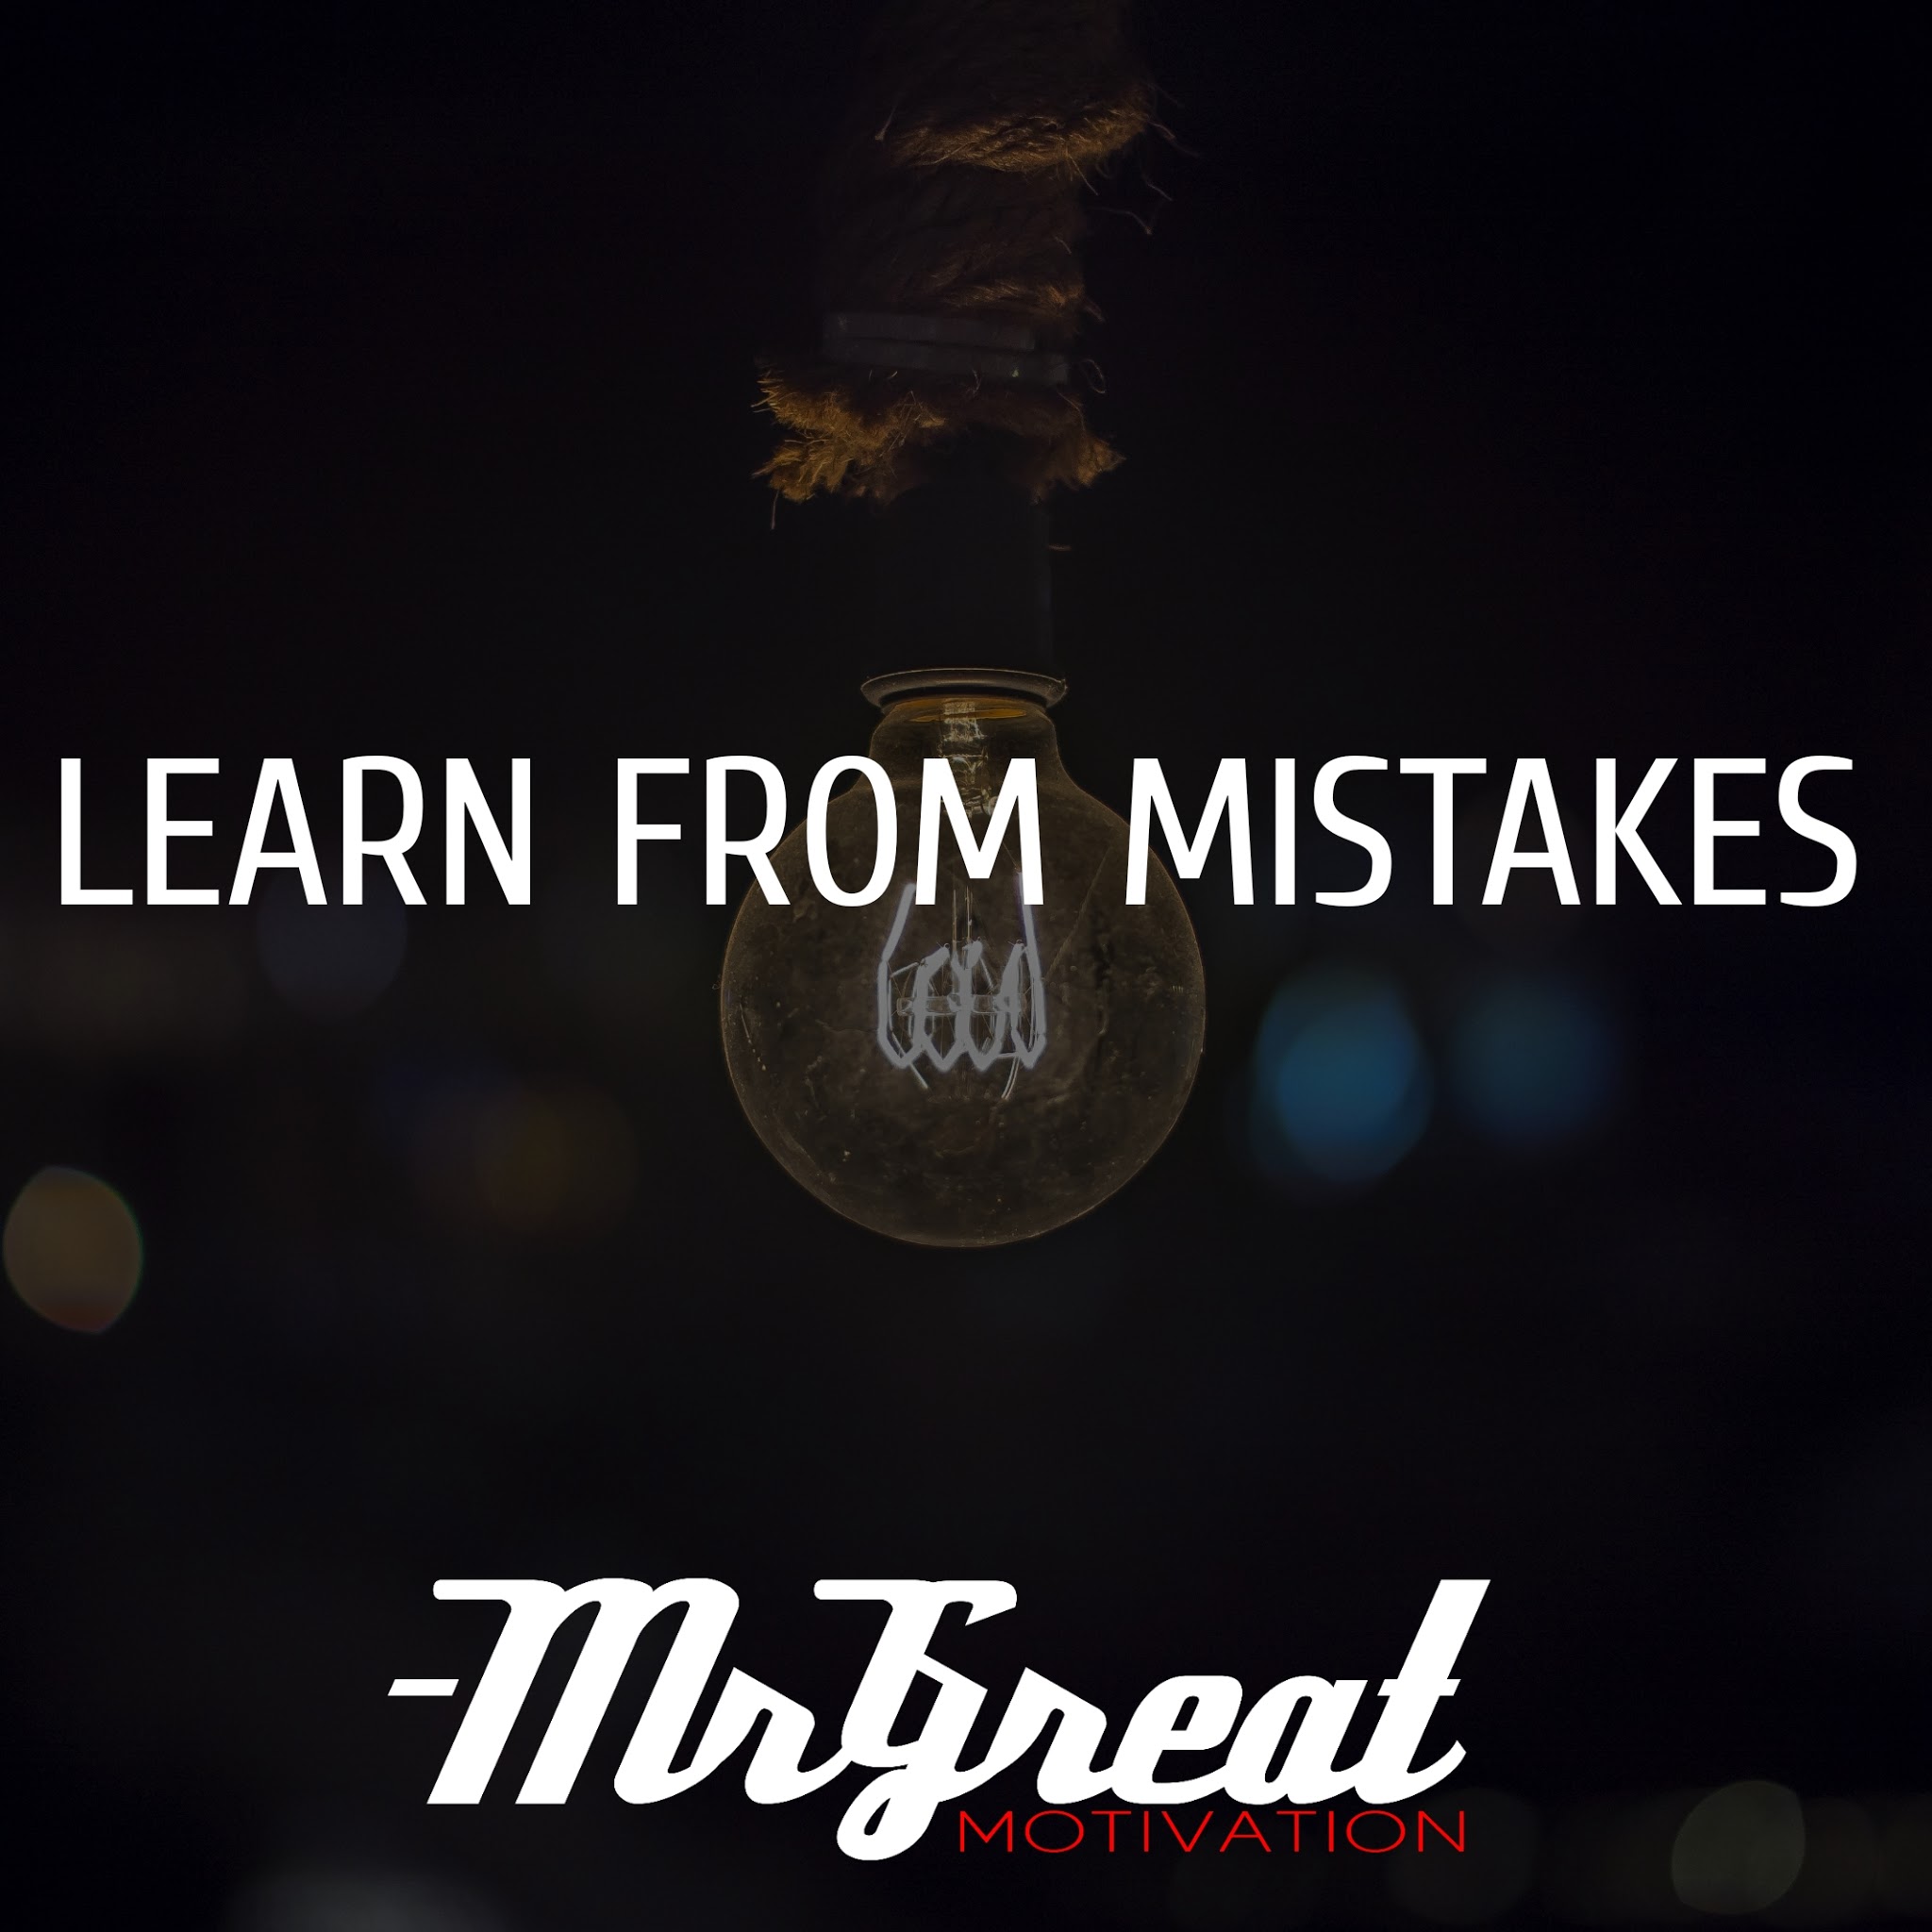 LEARN FROM MISTAKES - Mr Great Motivation